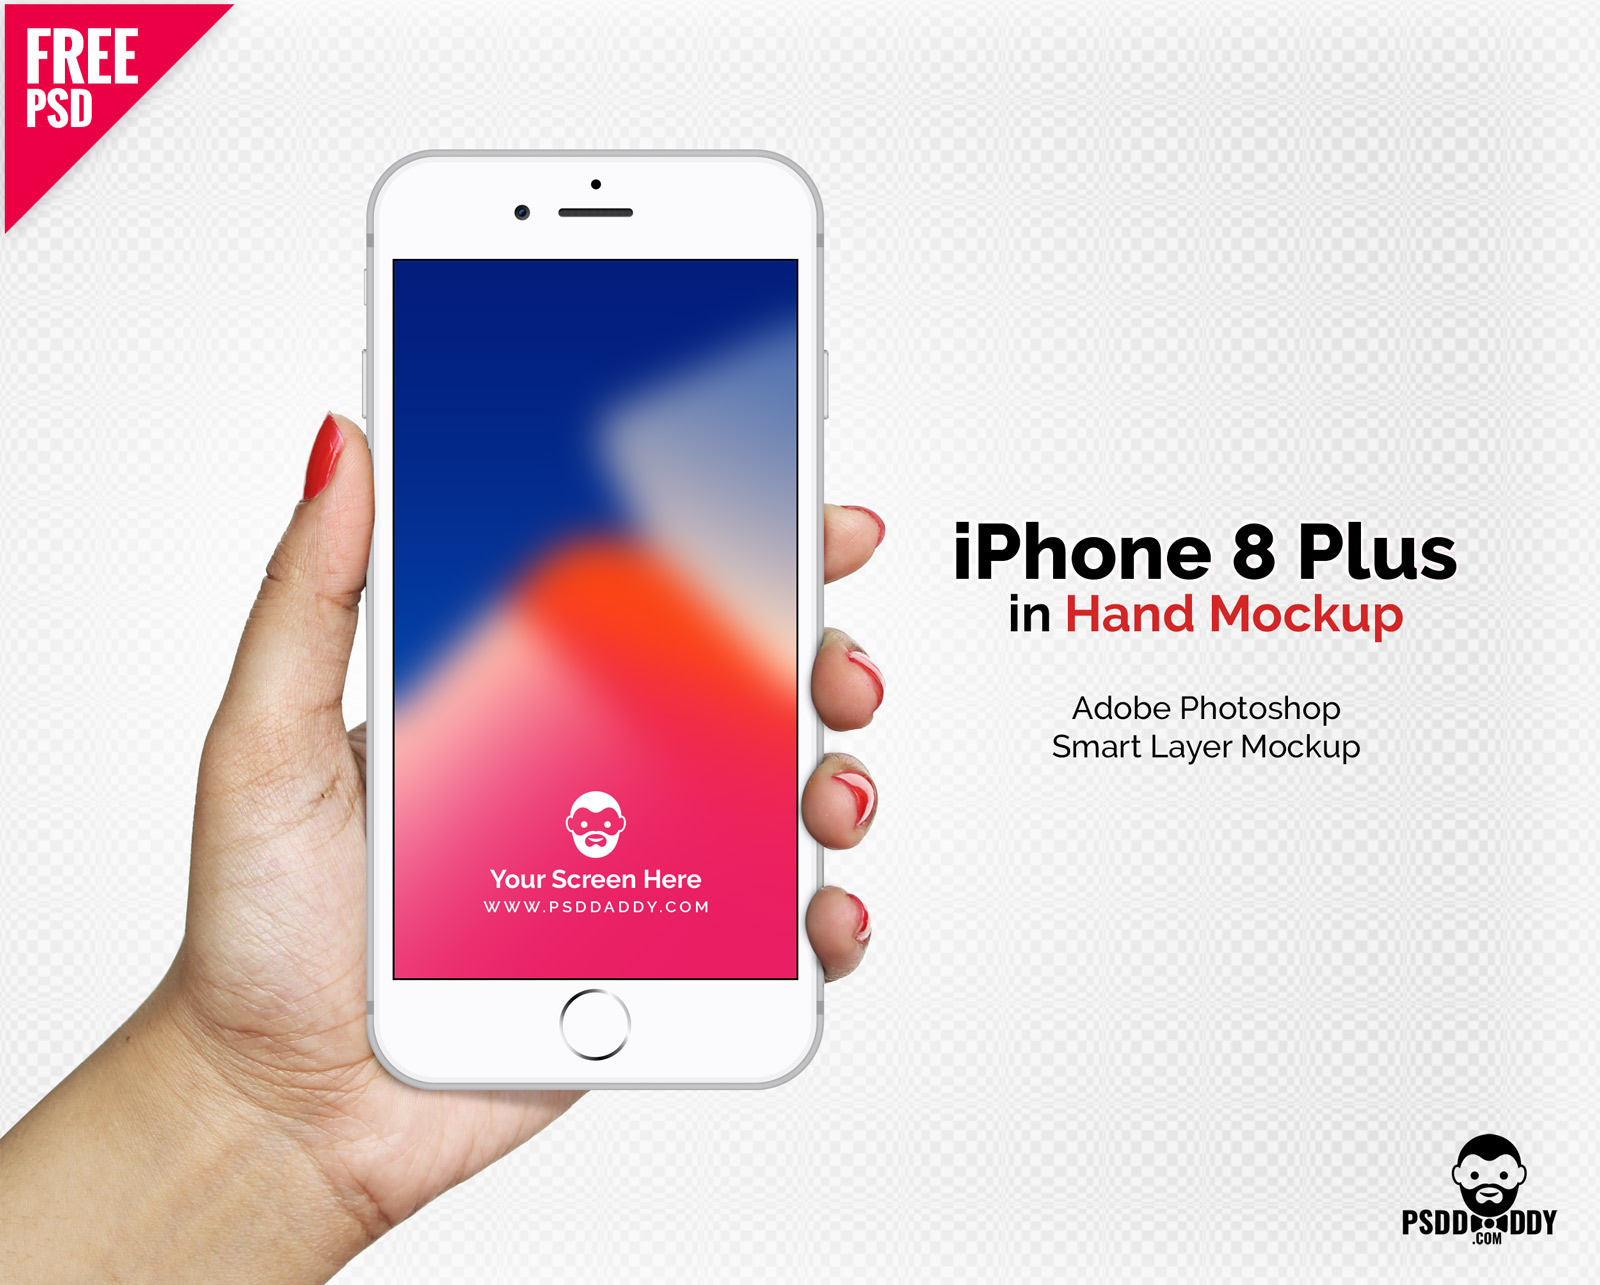 Download 30+ Awesome FREE PSD iPhone Mockups for Exclusive Presentations! | Free PSD Templates